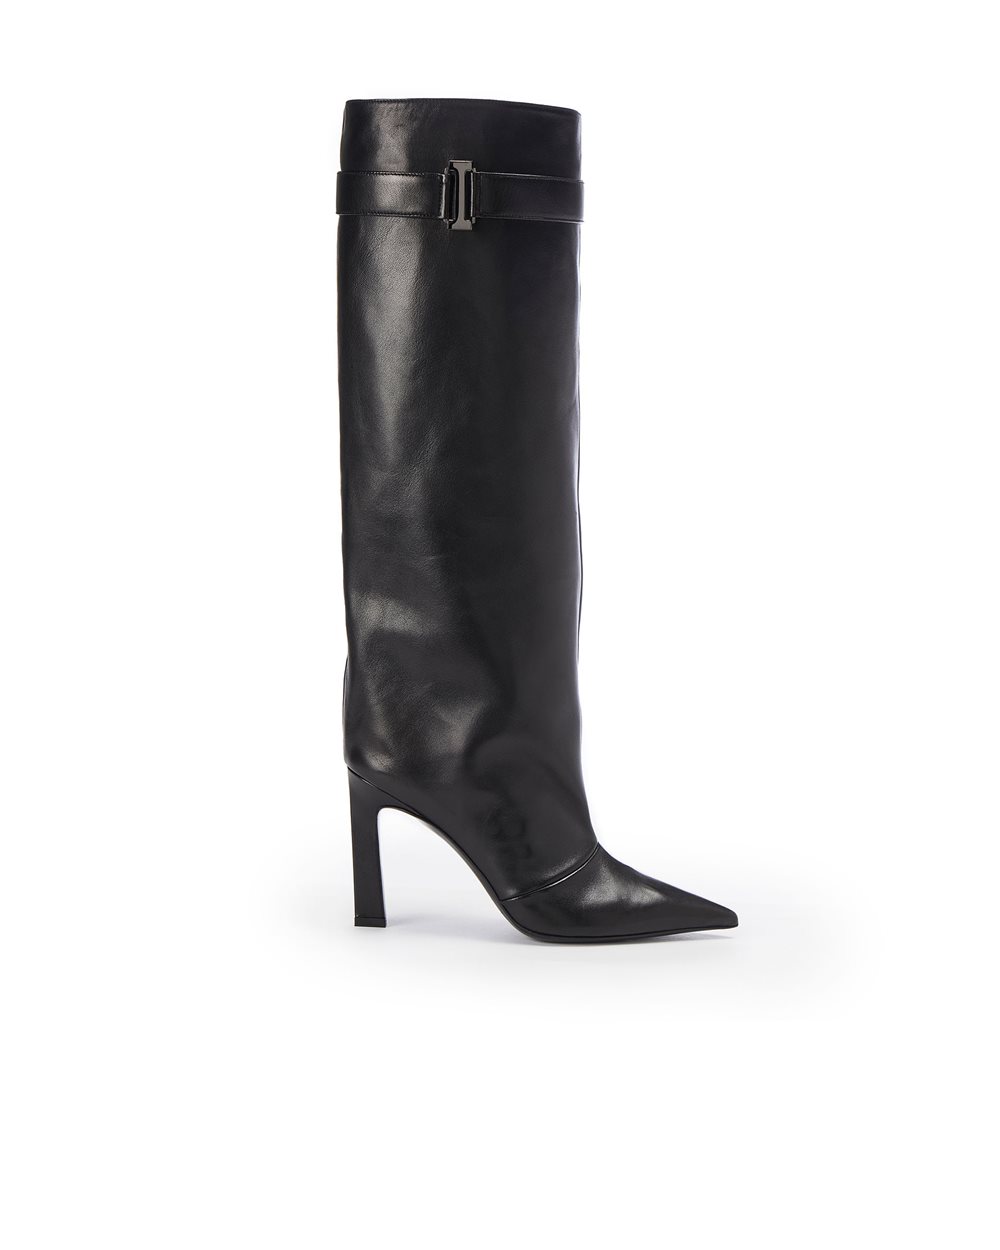 Leather boots with strap | Iceberg - Official Website